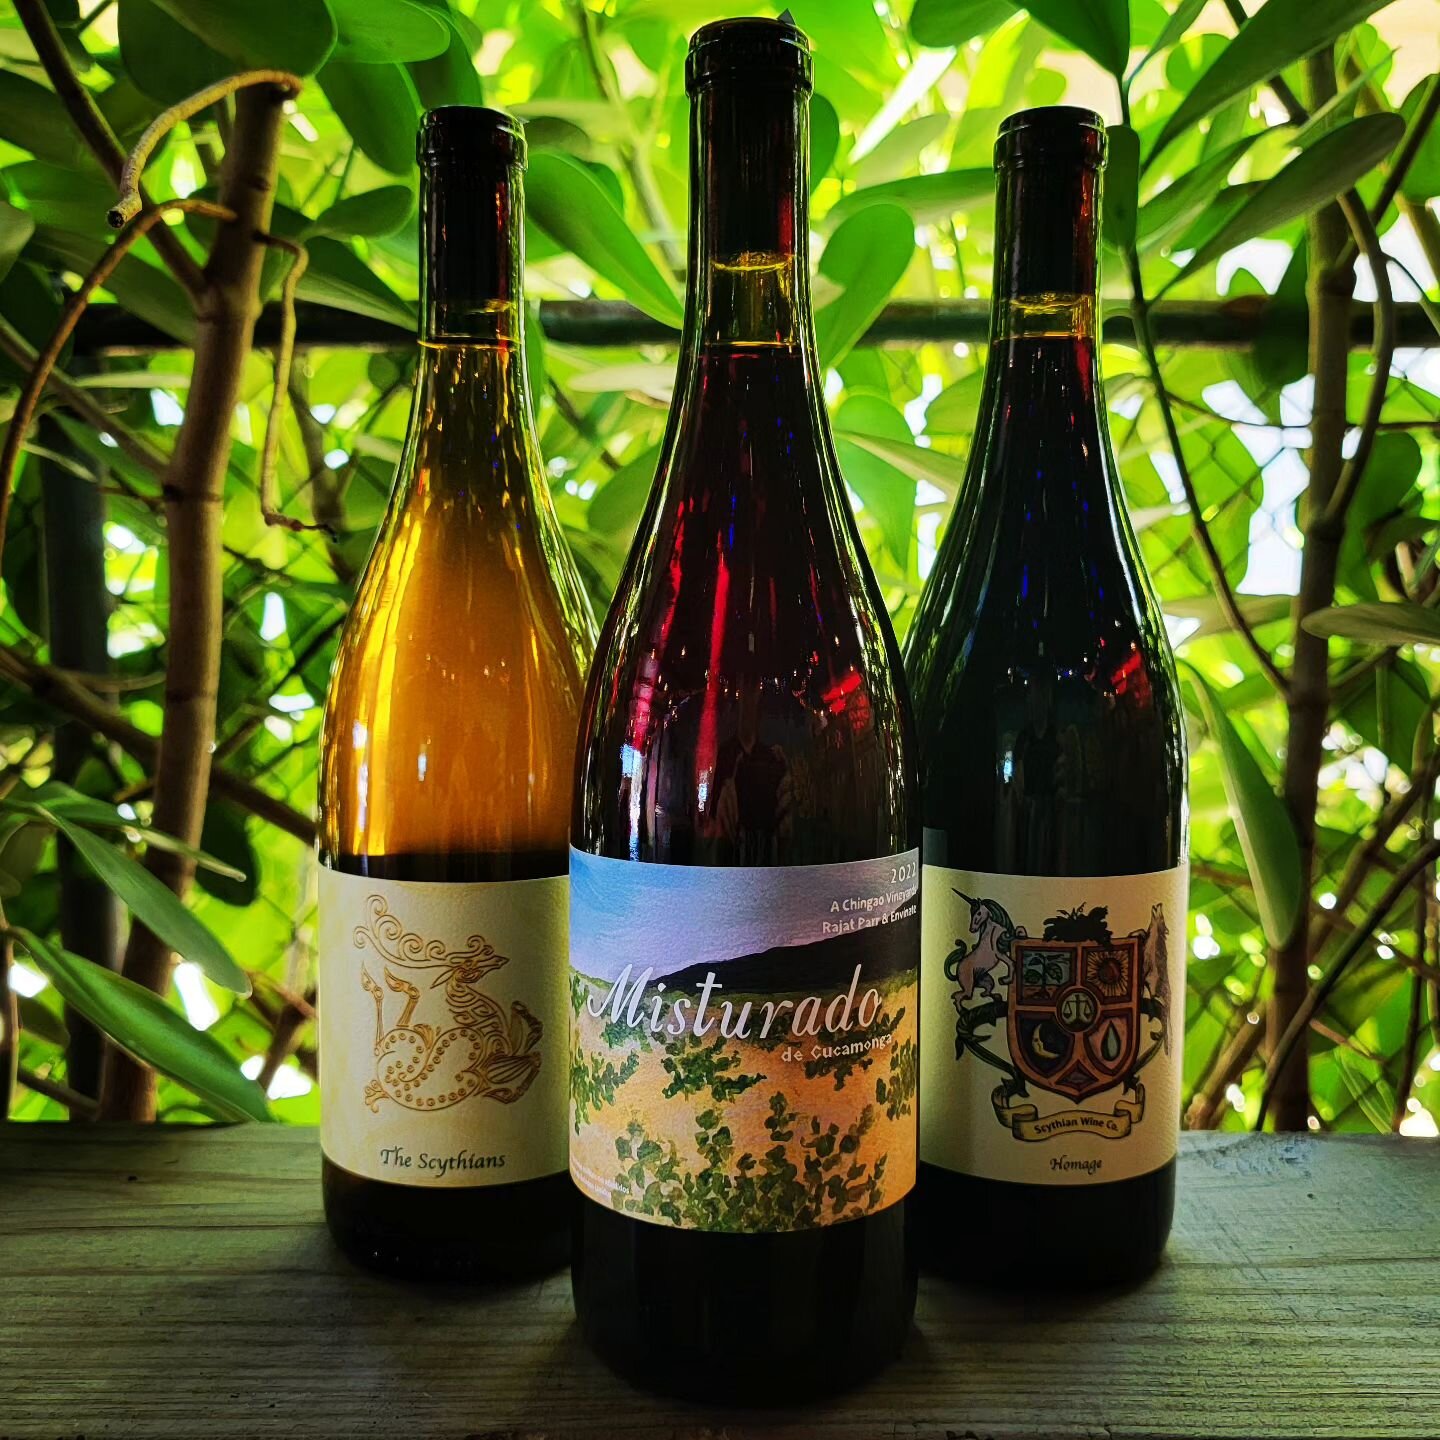 ✨ SUPER Limited wine drop today!

 Introducing Scythian Wine Co.

The new venture by sommelier-turned-vigneron Raj Parr, reviving LA's almost forgotten viticultural heritage. Hid wines hail from rehabilitated ancient, dry-farmed vineyards, untouched 